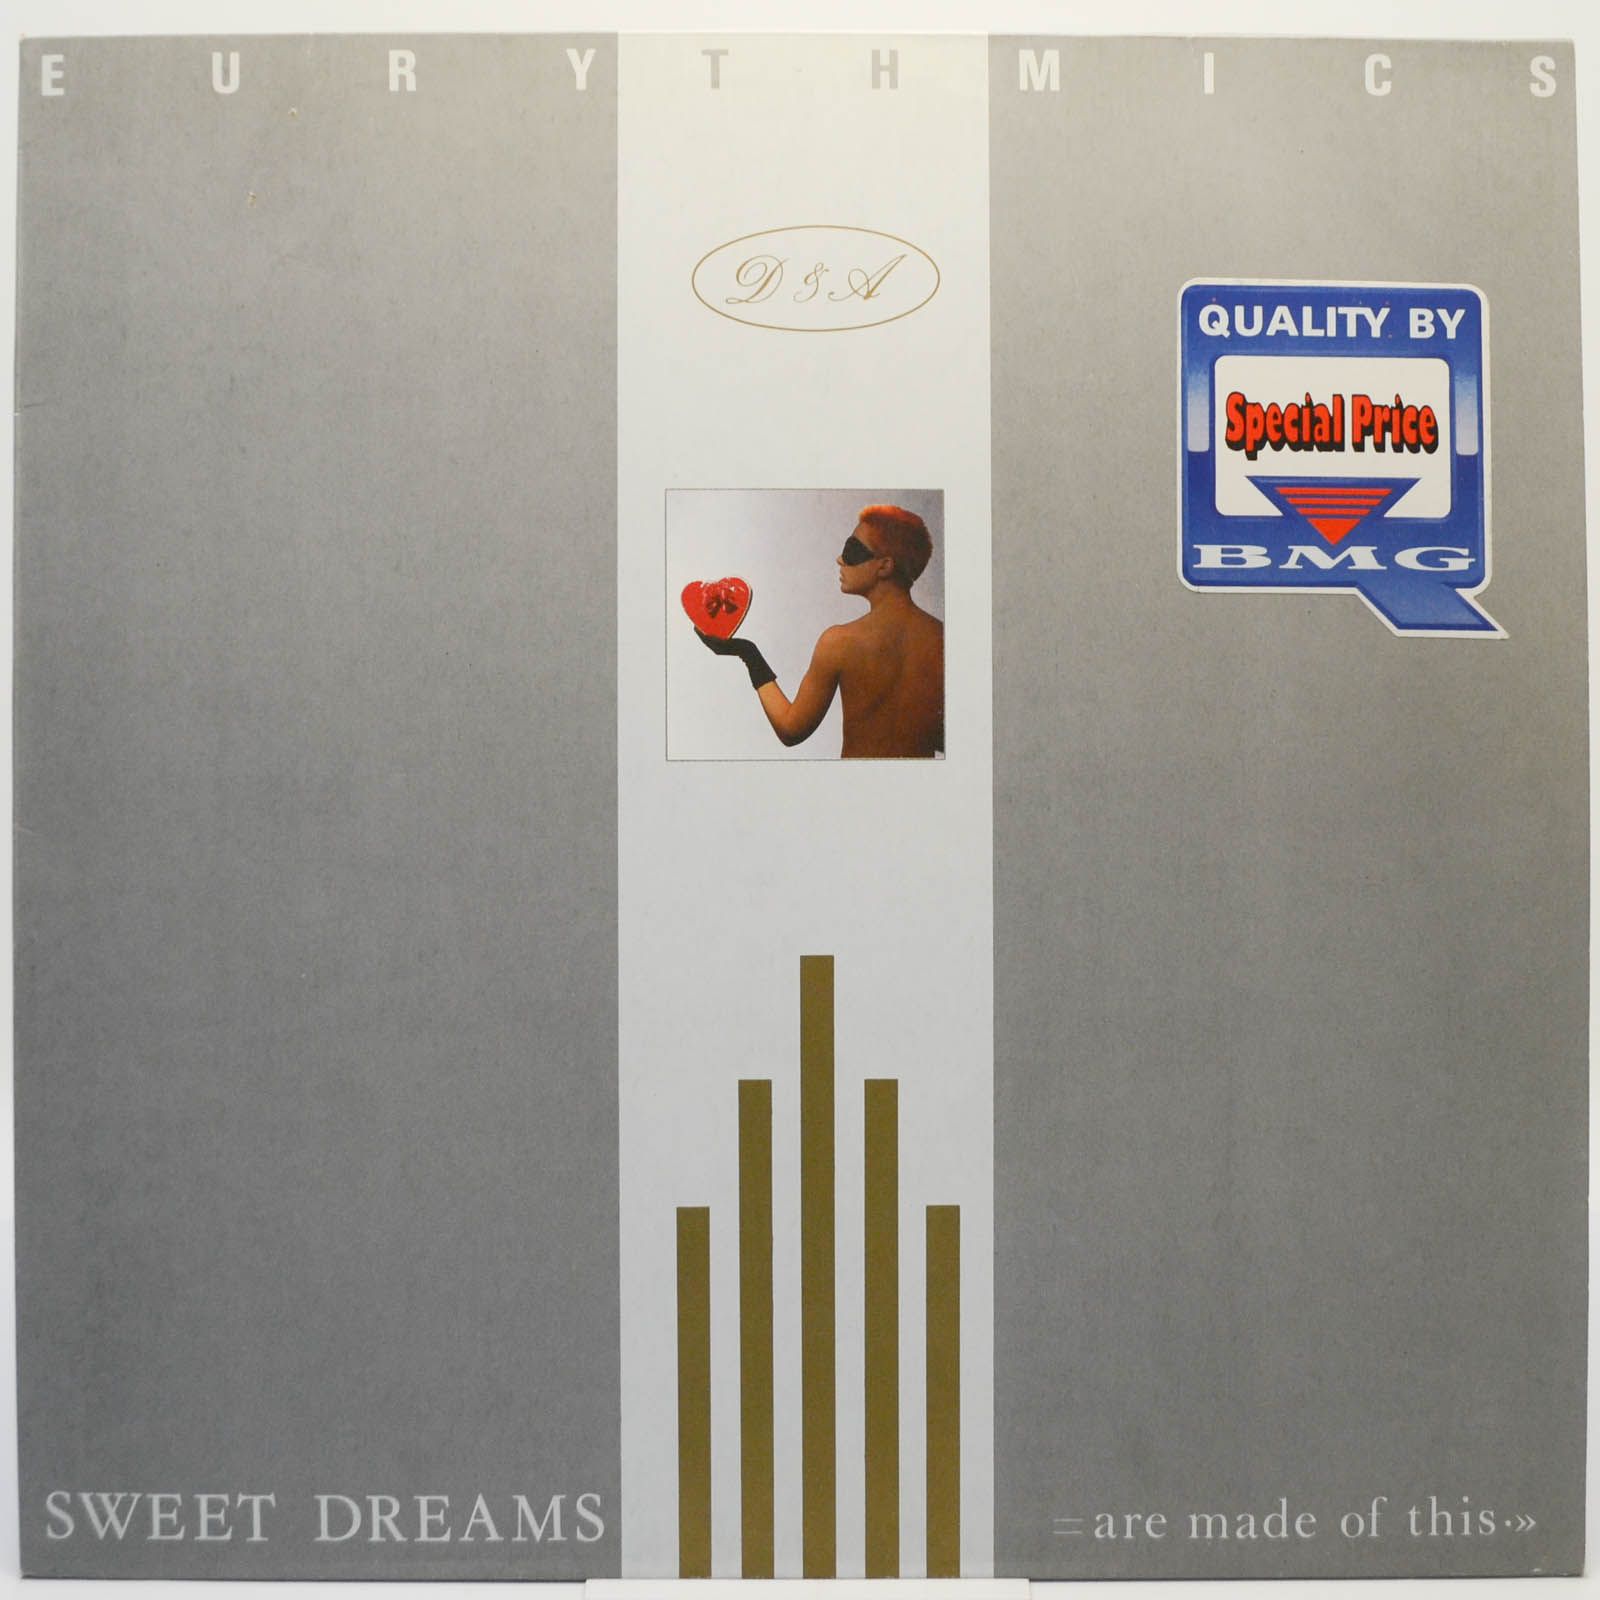 Eurythmics — Sweet Dreams (Are Made Of This), 1983